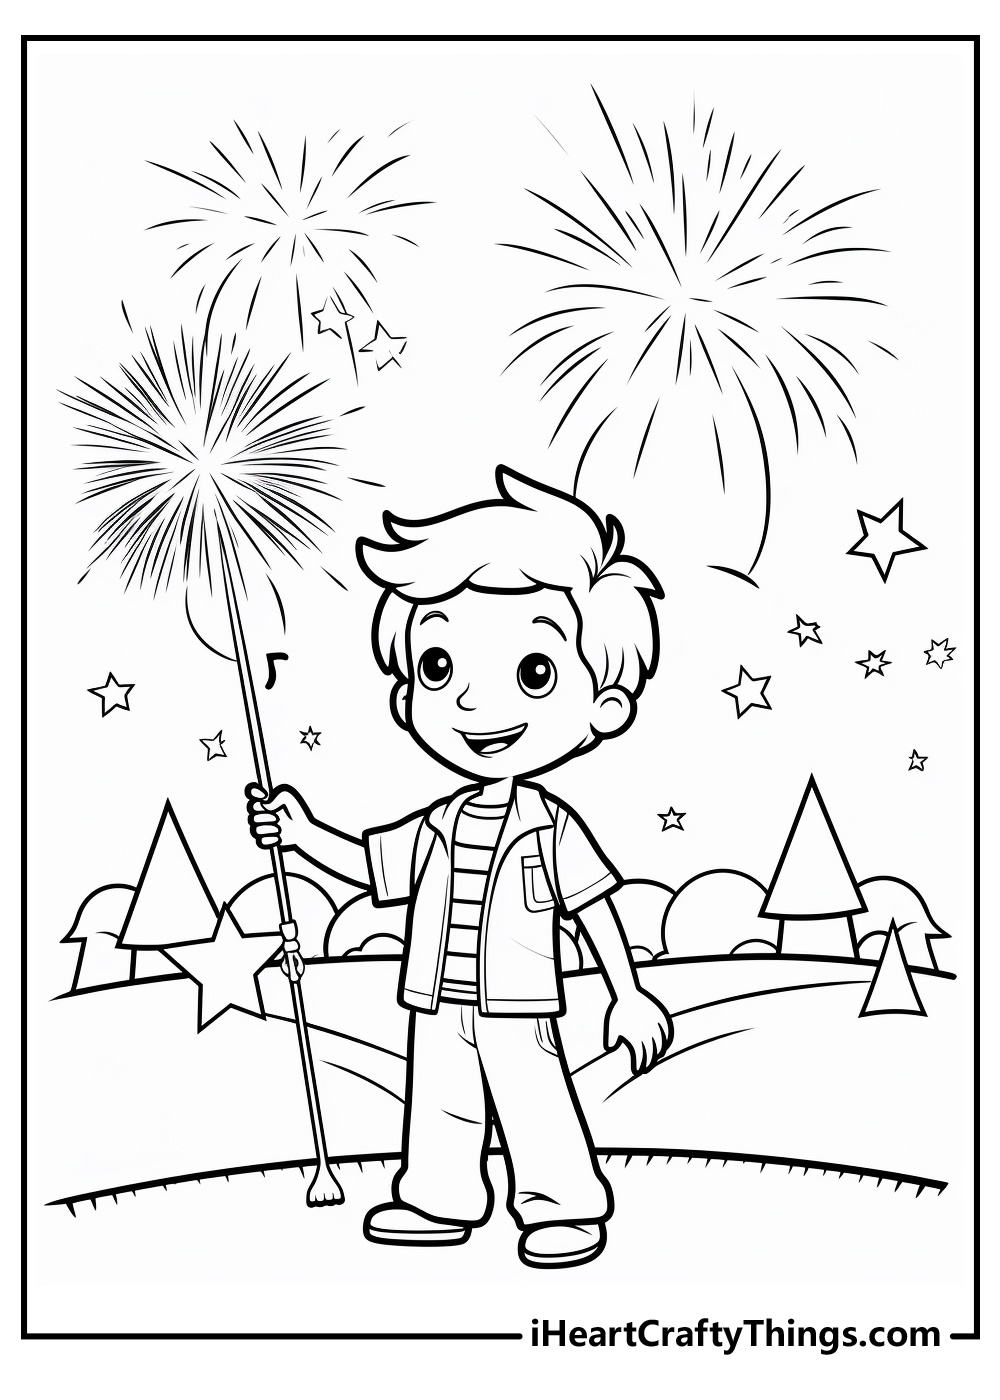 4th of july coloring sheet for kids free download